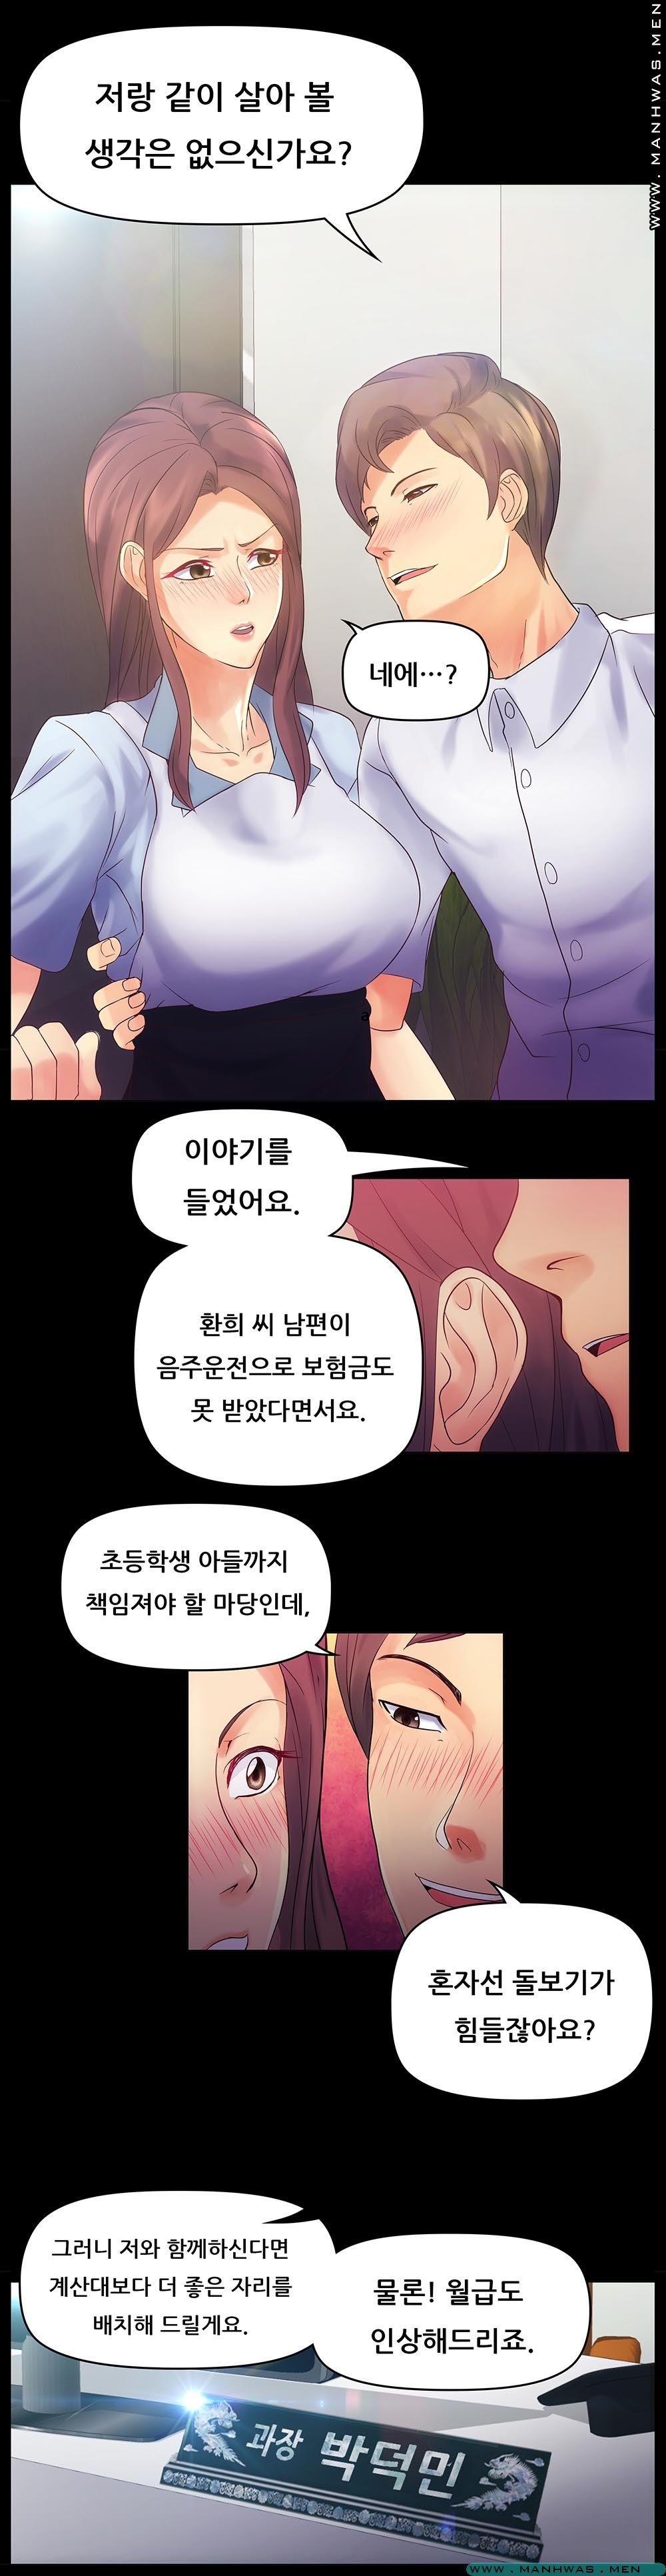 Desire Manager Raw - Chapter 1 Page 11